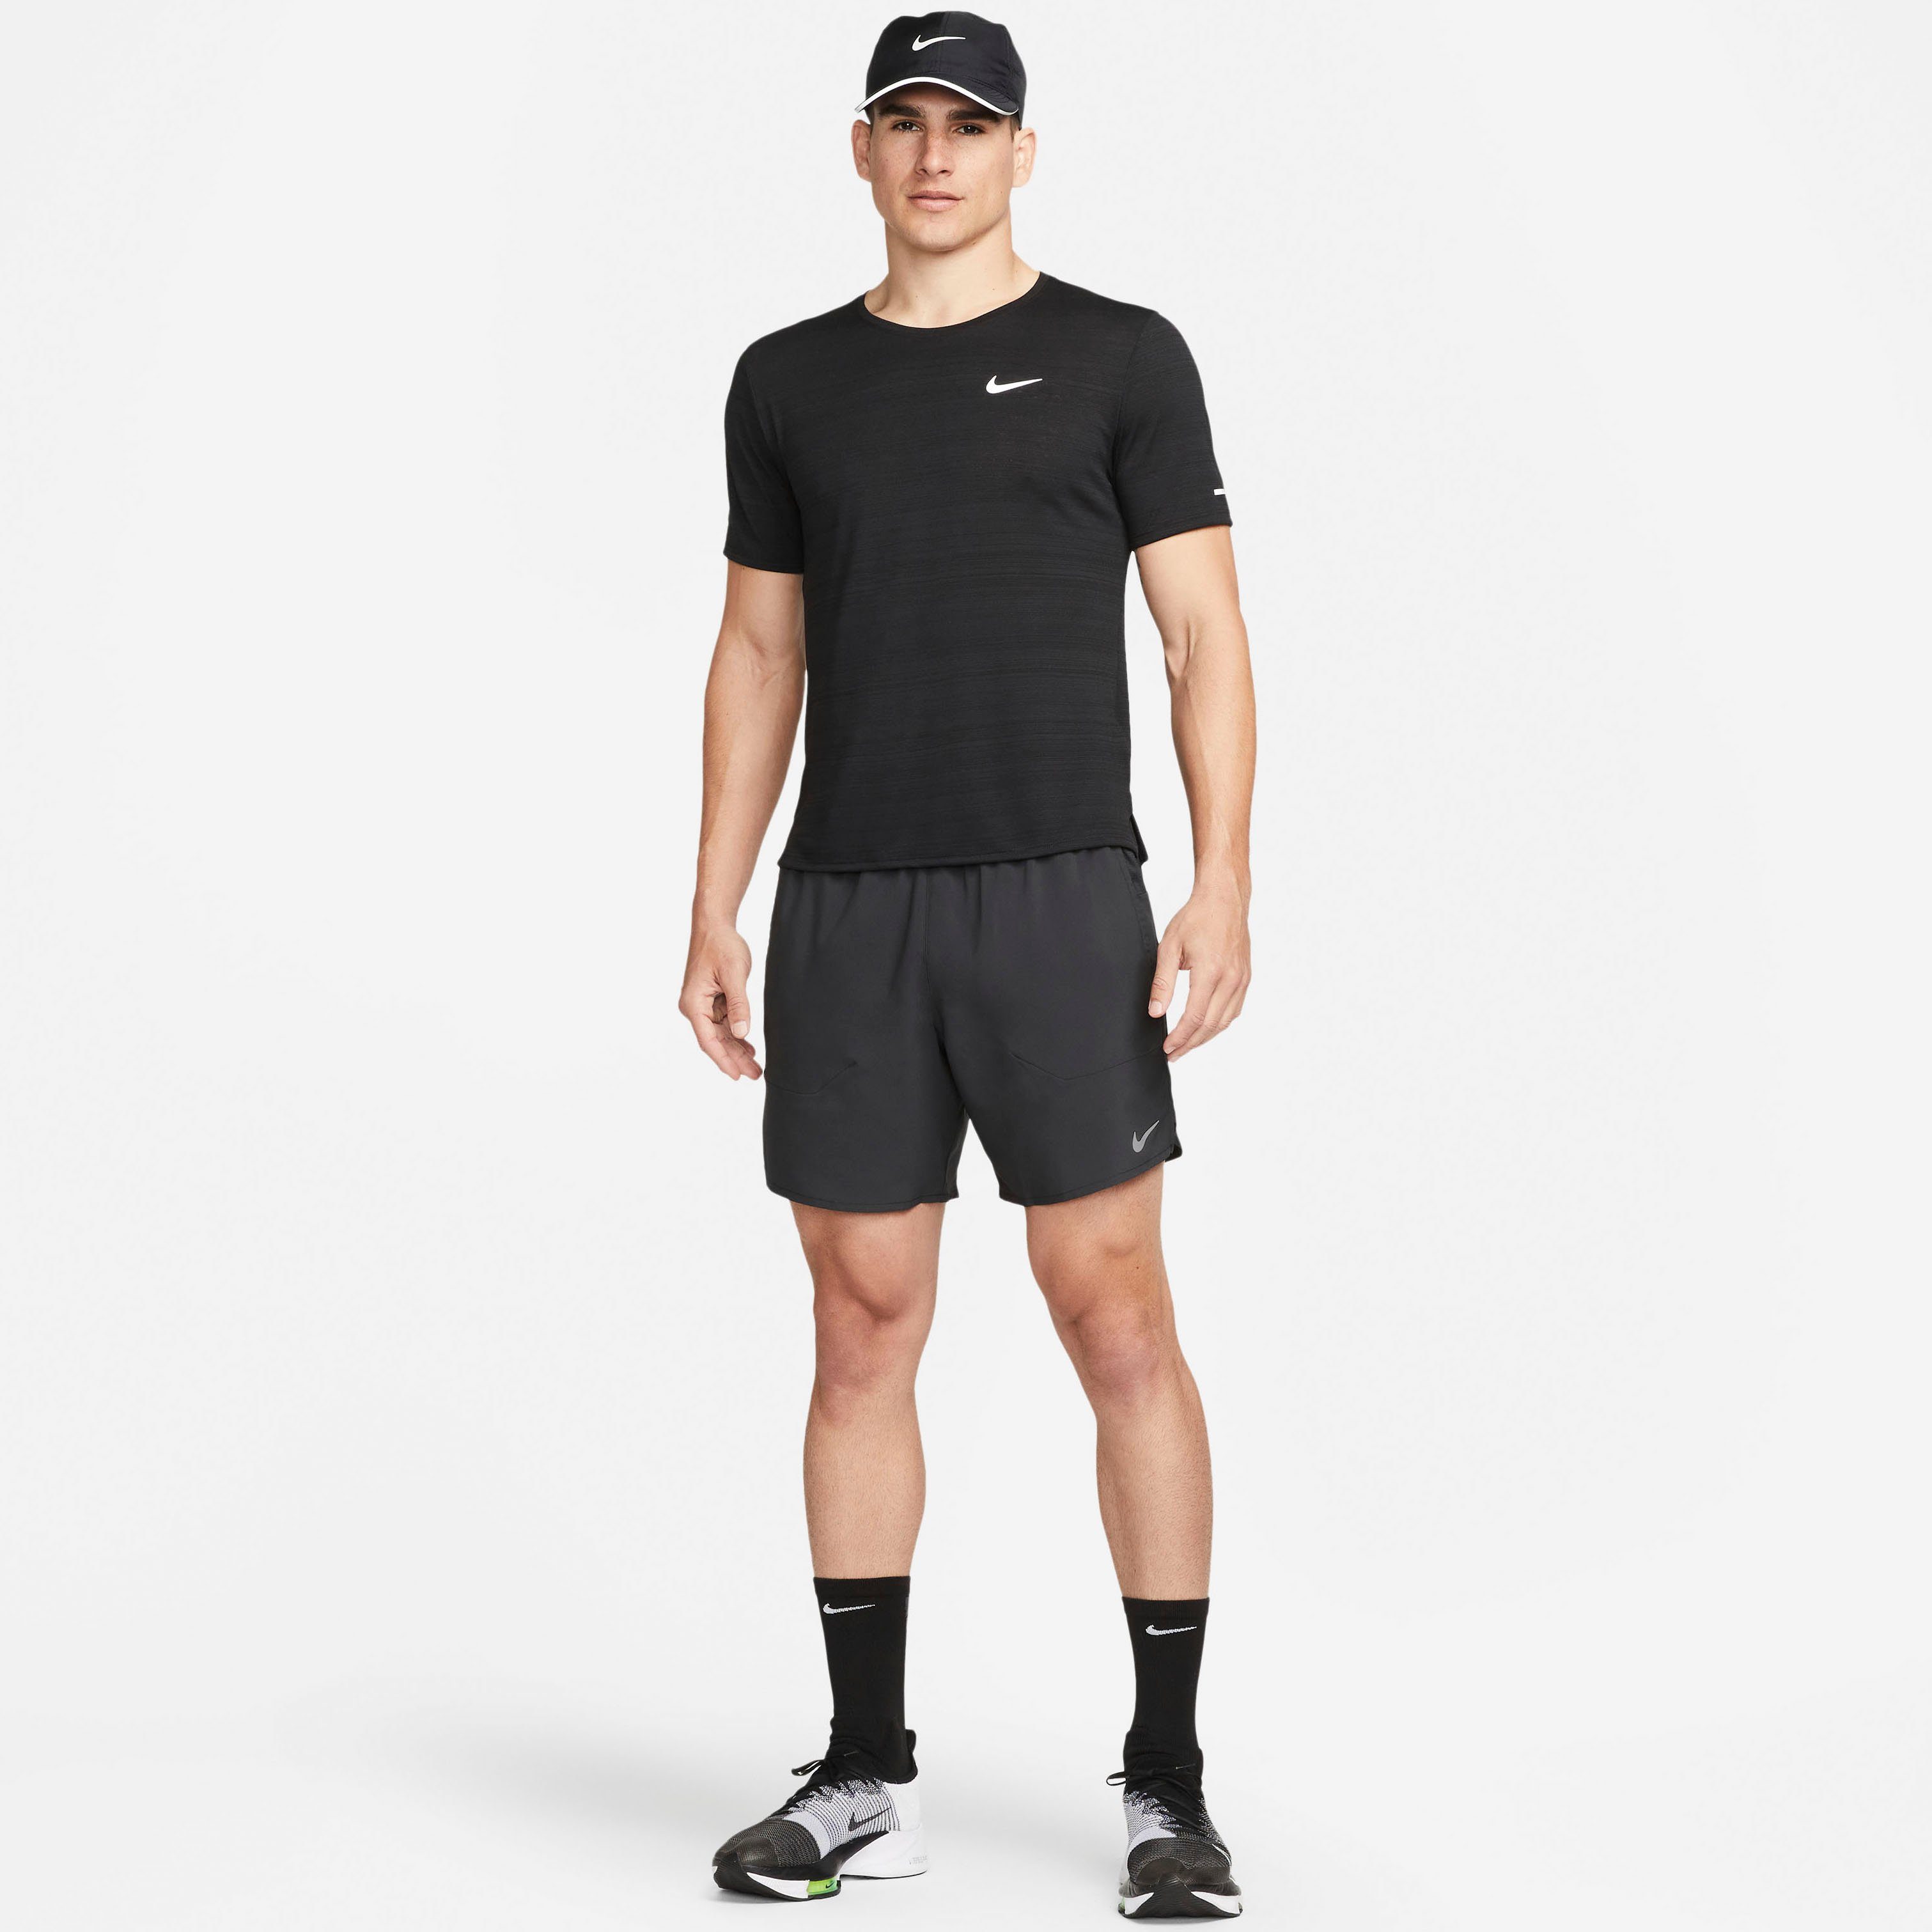 Stride Men's Brief-Lined Nike Running Laufshorts Shorts " Dri-FIT